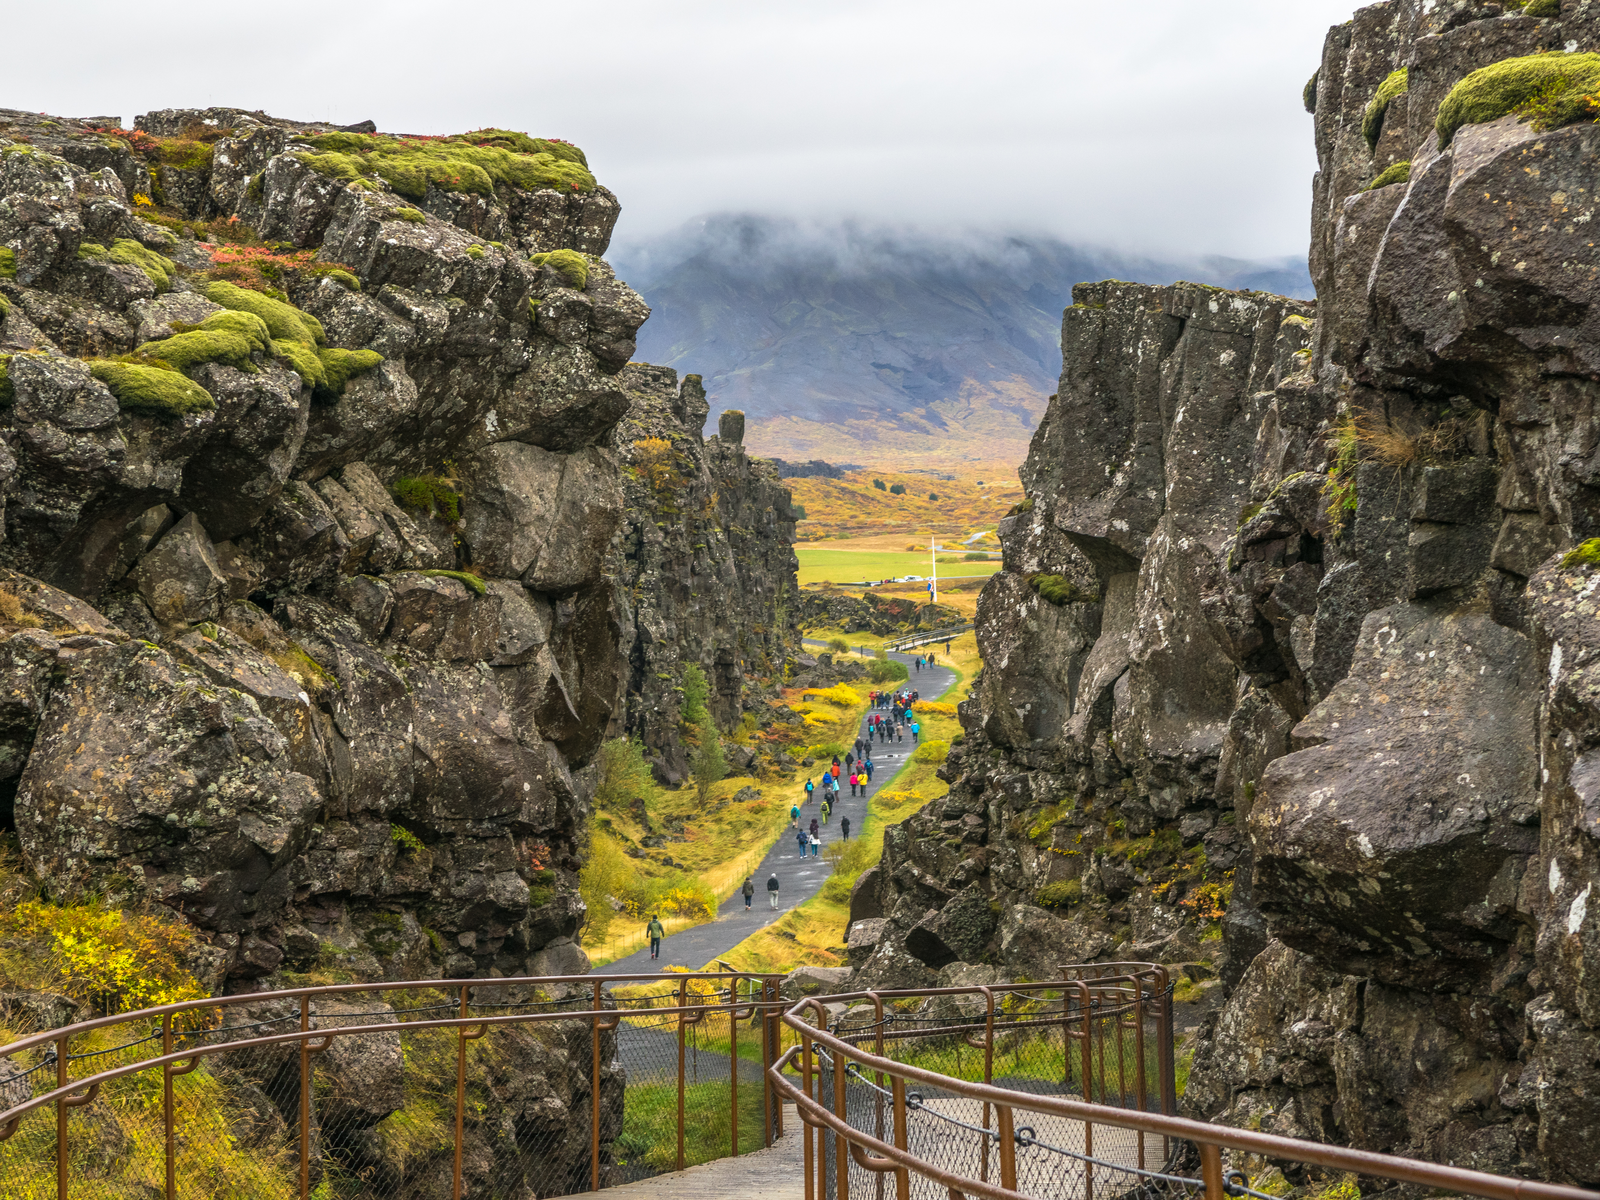 Photographed from a railed footpath as a piece on Game of Thrones filming locations you can visit, people walking beside the Eurasian and North American tectonic plates in Thingvellir National Park, Iceland